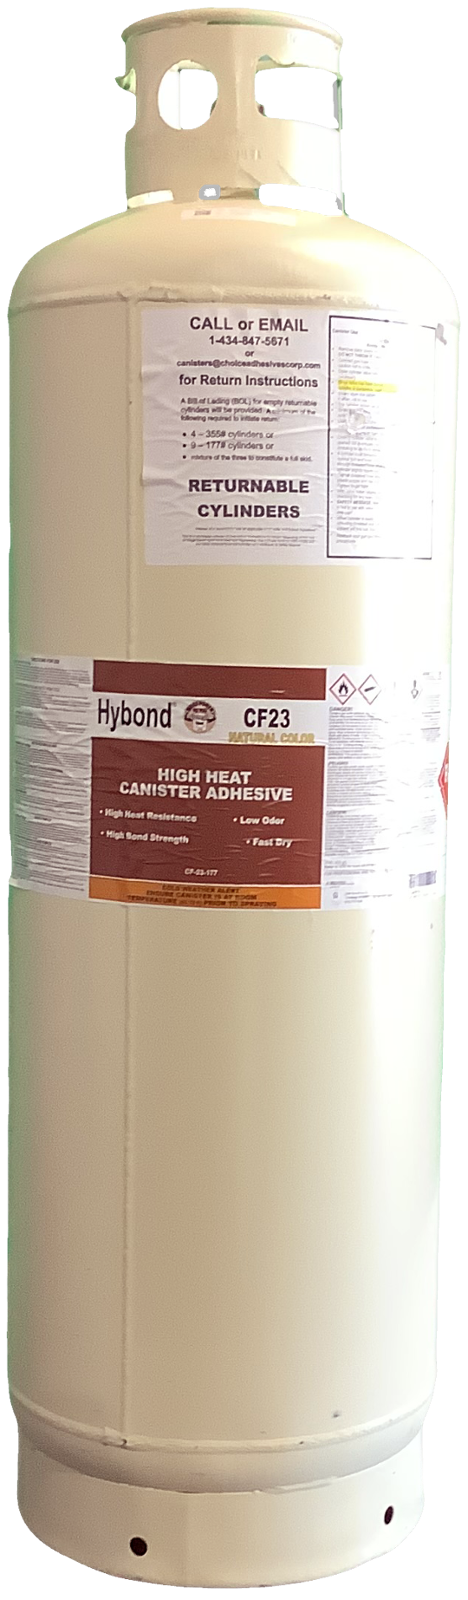 Hybond Consumer-Grade Flammable Contact Adhesive